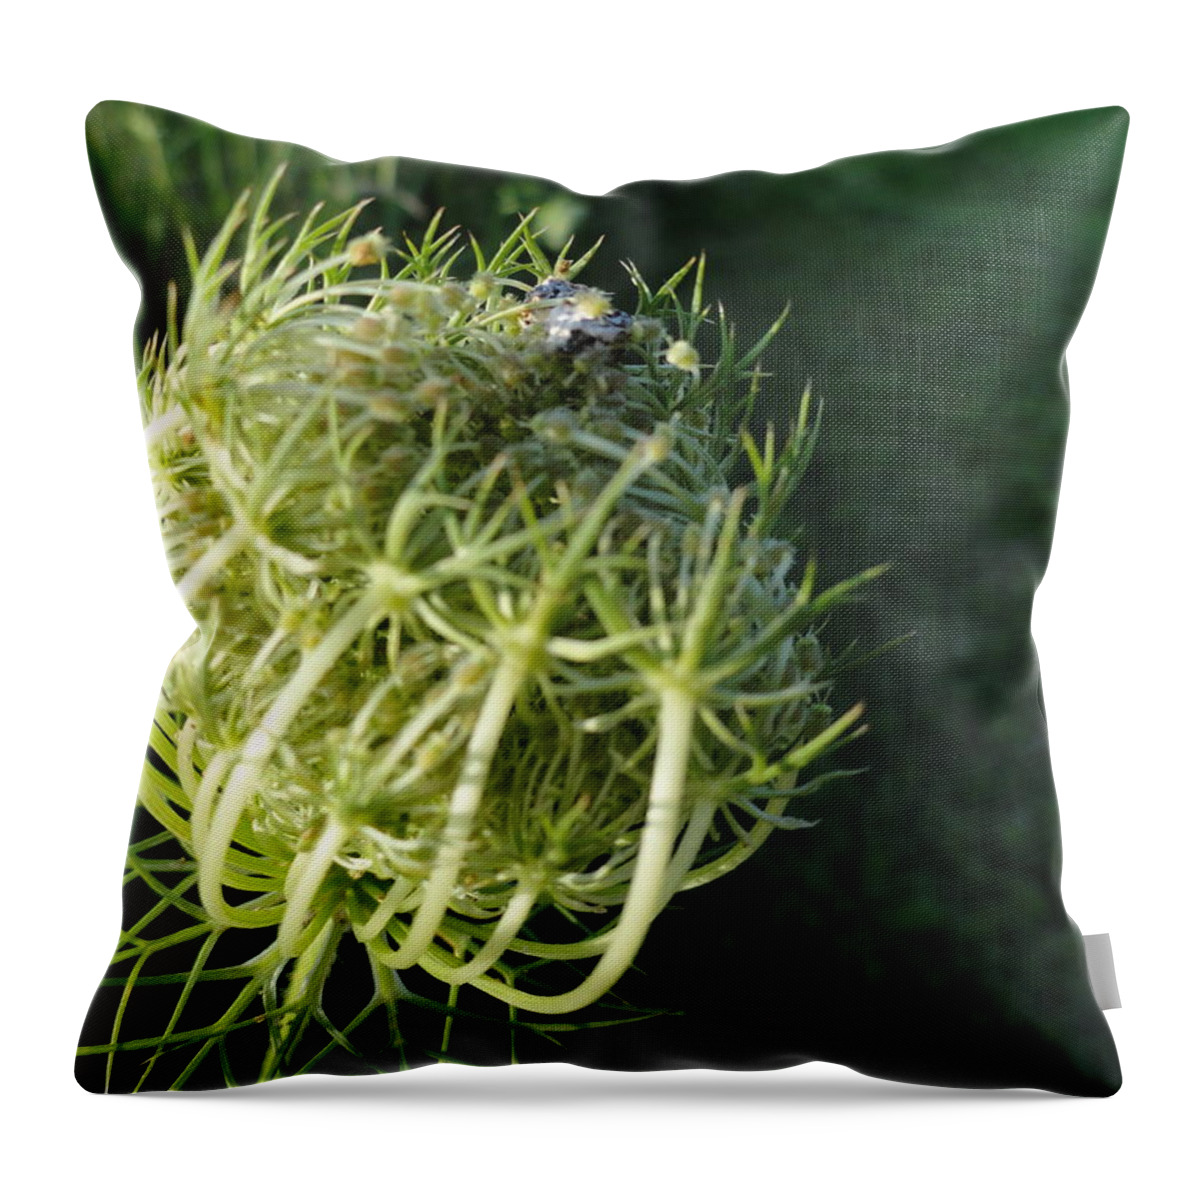  Throw Pillow featuring the photograph The Queen Is Home #1 by Trish Hale